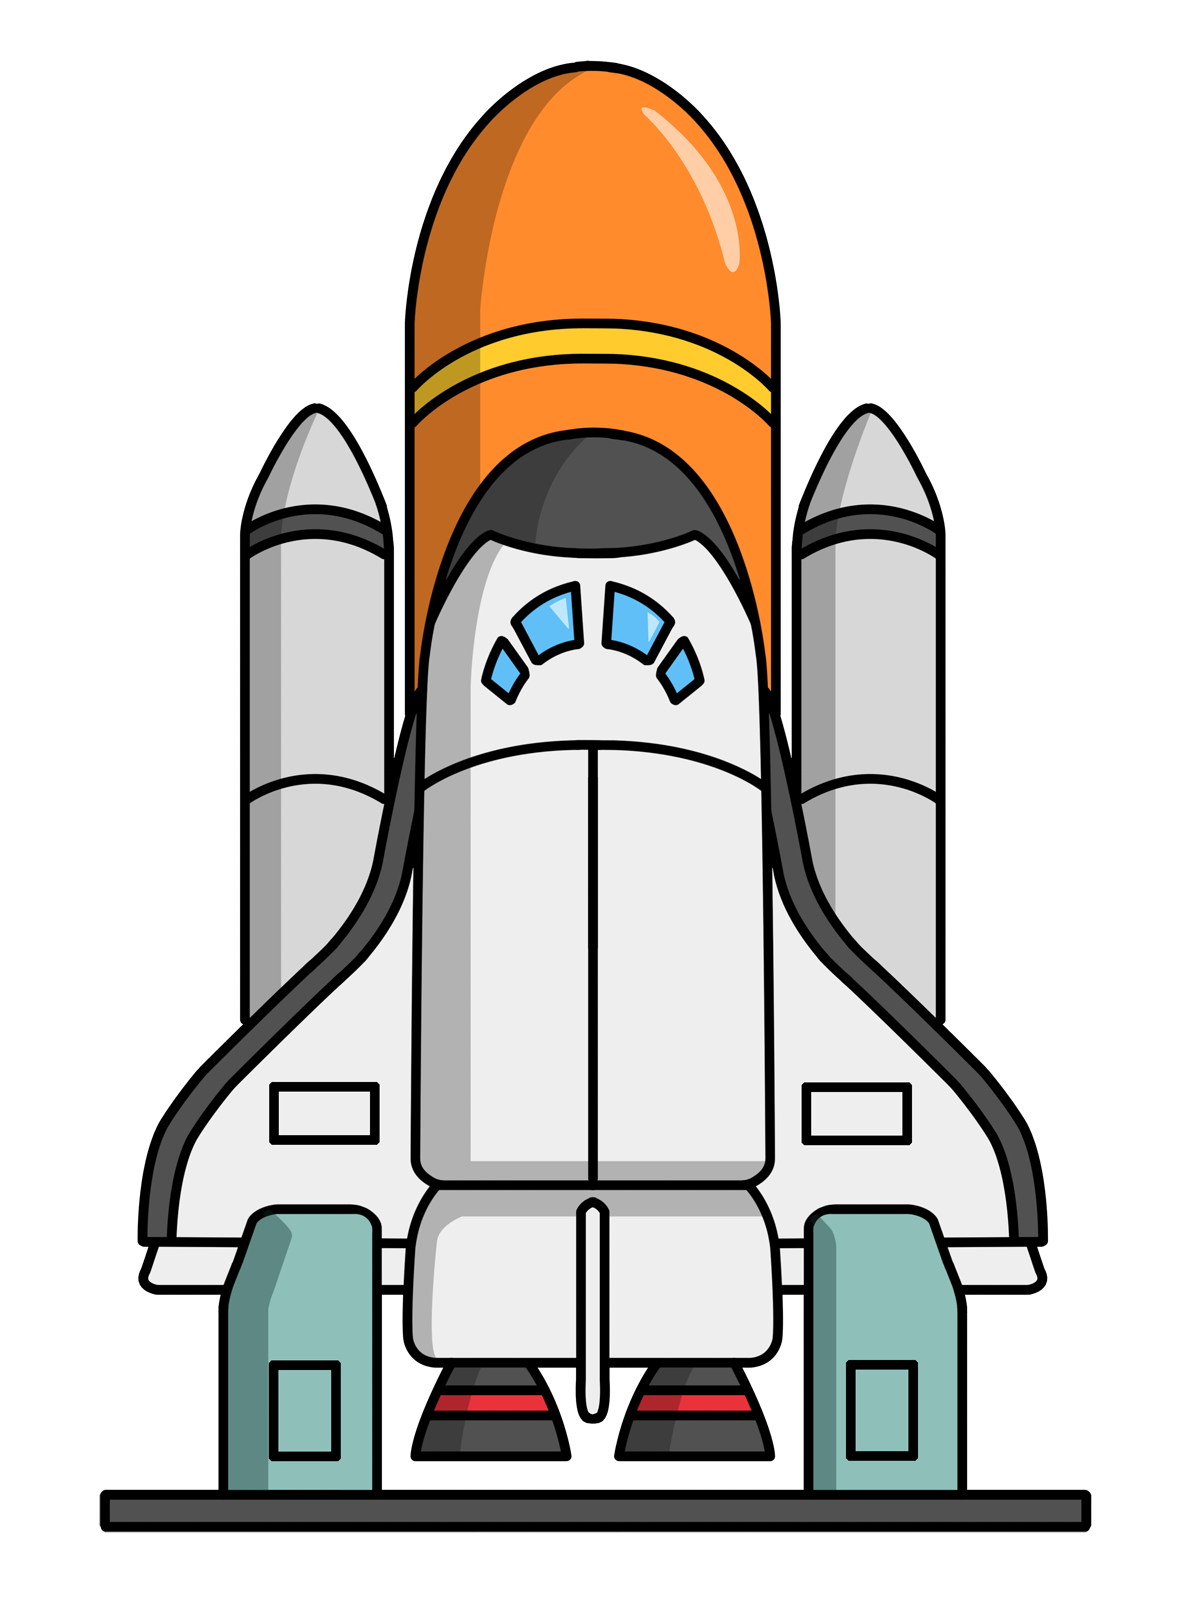 Cartoon Space Pictures - ClipArt Best